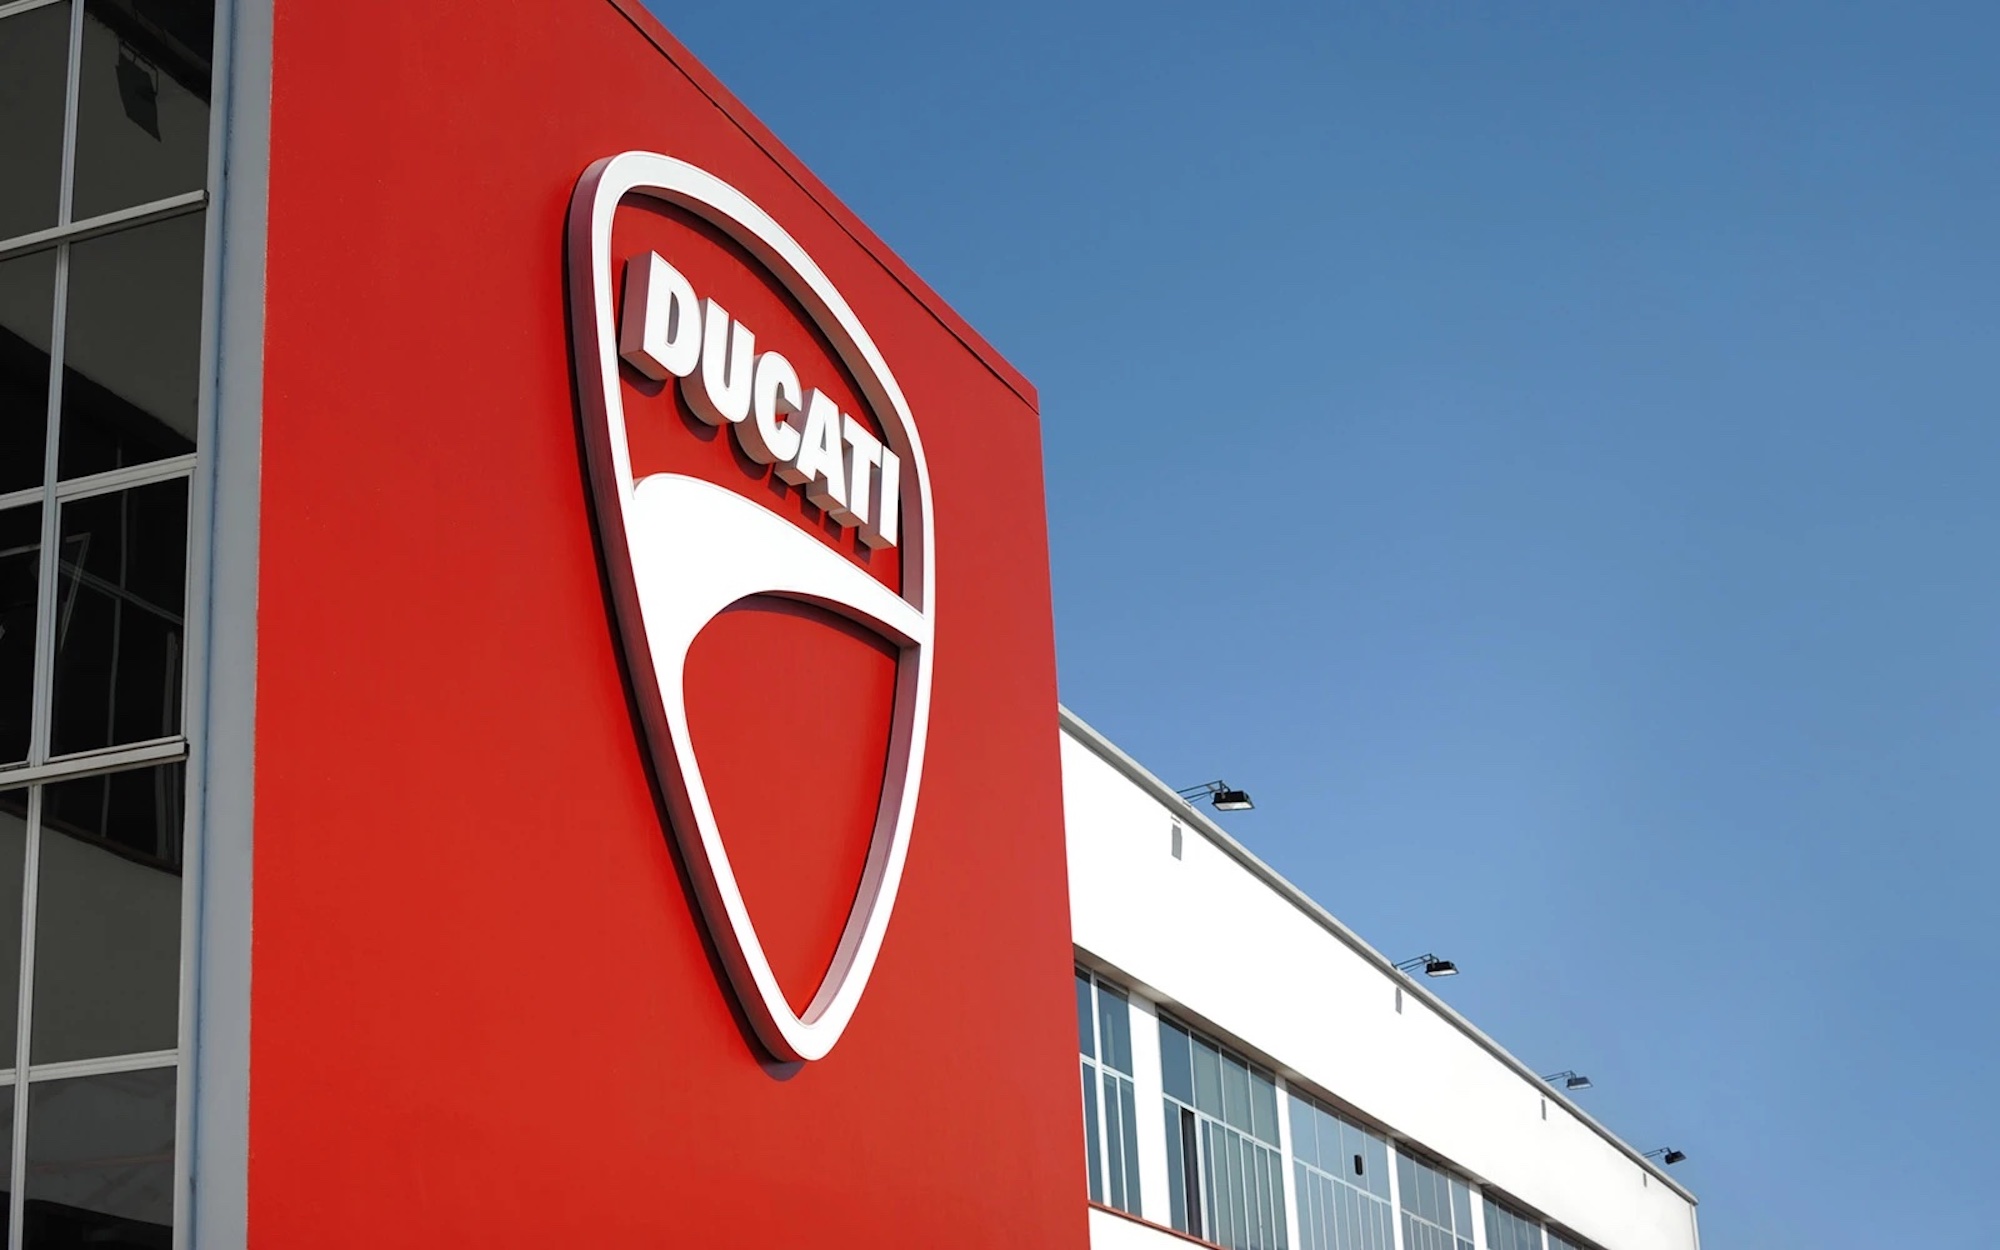 A view of Ducati's headquarters in Bologna. Media sourced from Ducati.